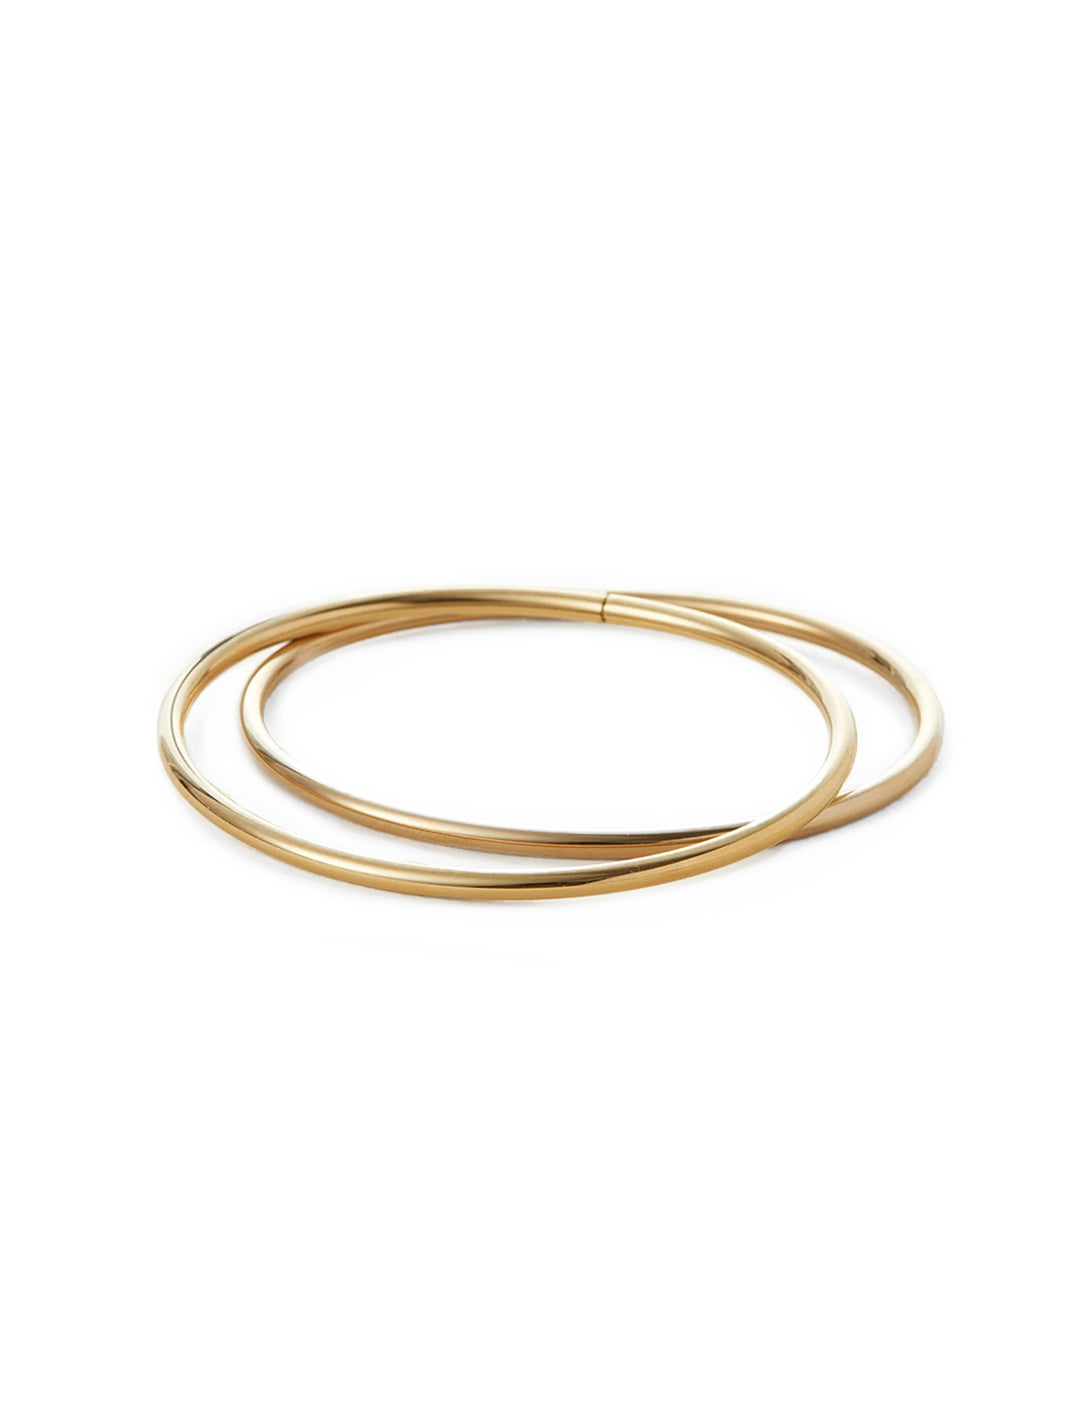 Overhead view of Jenny Bird's dane bangle set of 2 in gold.